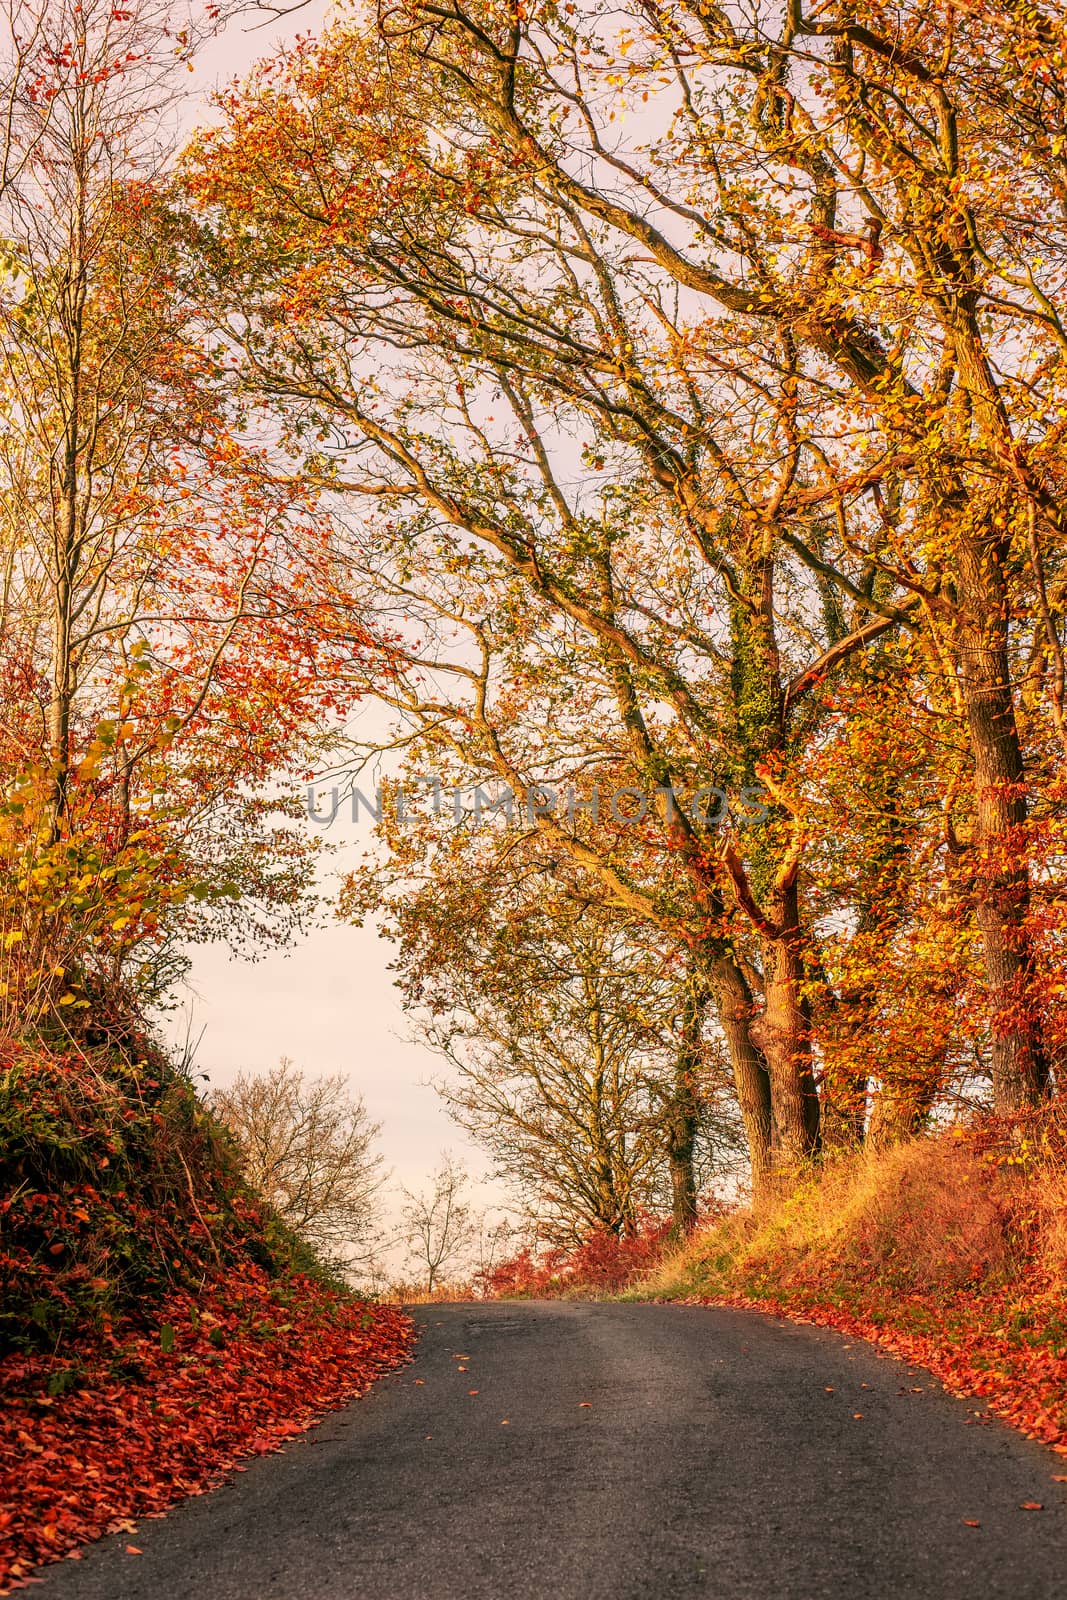 Autumn scenery with a road by Sportactive